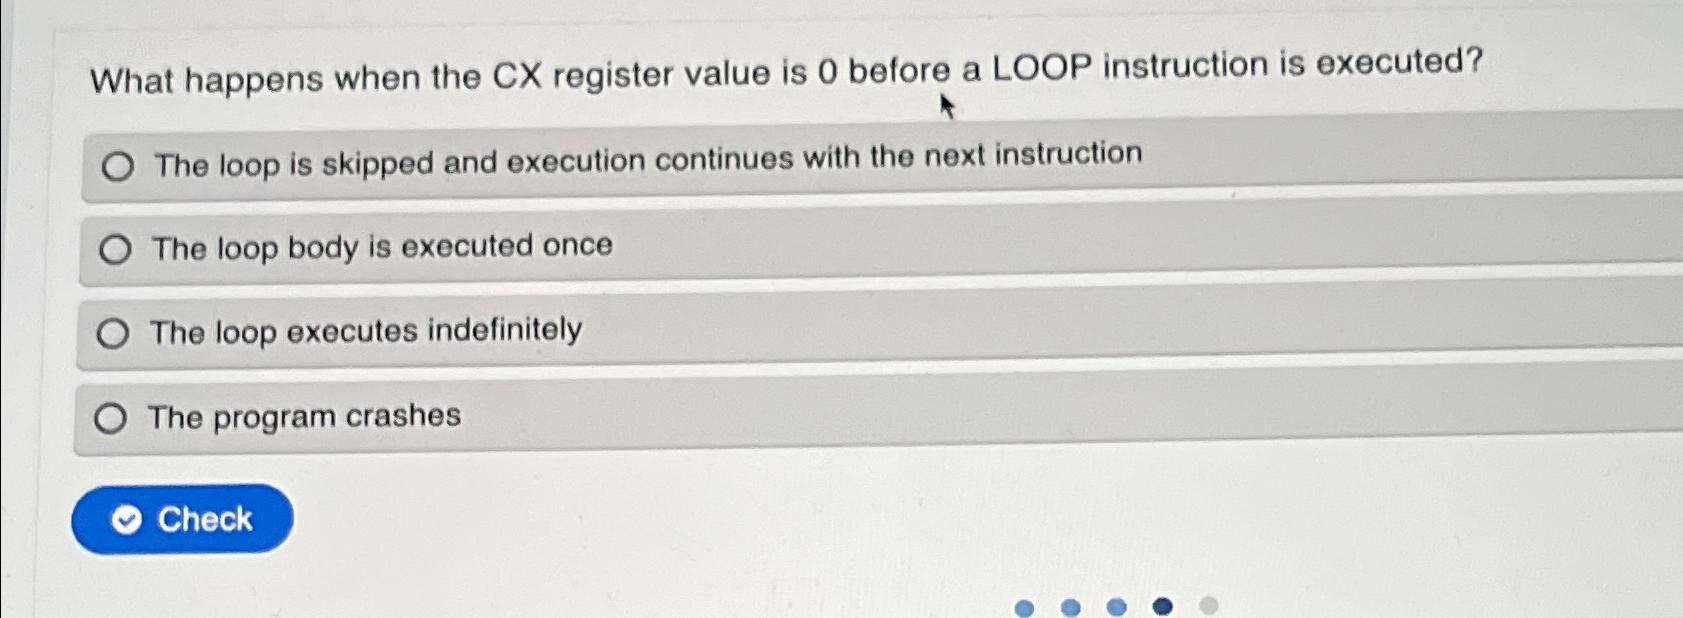 What happens when the CX register value is 0 before a LOOP instruction is executed? The loop is skipped and